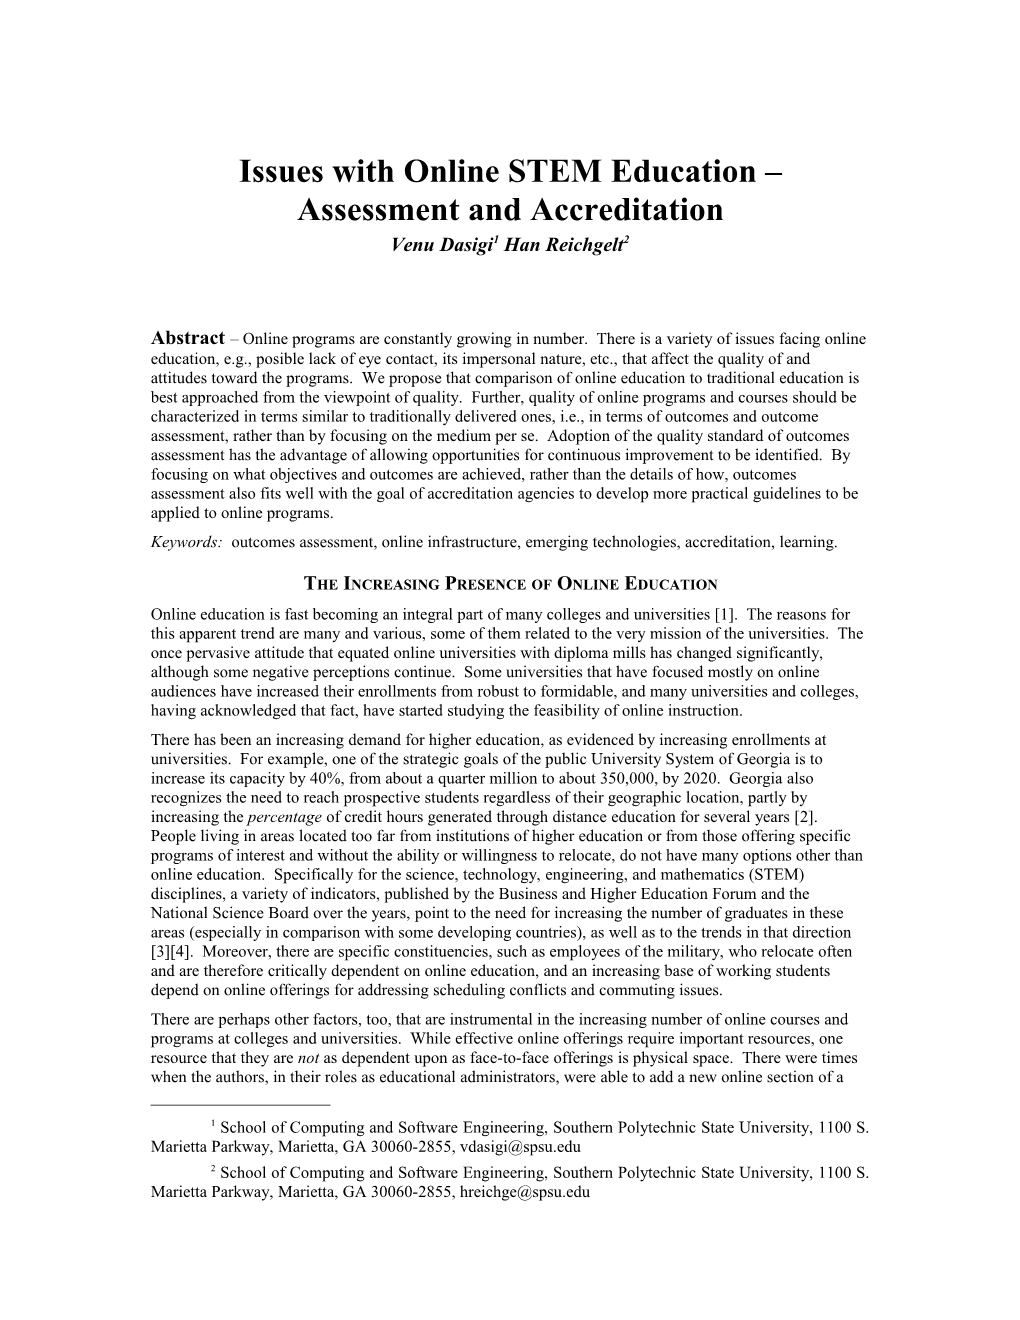 Issues with Online STEM Education Assessment and Accreditation